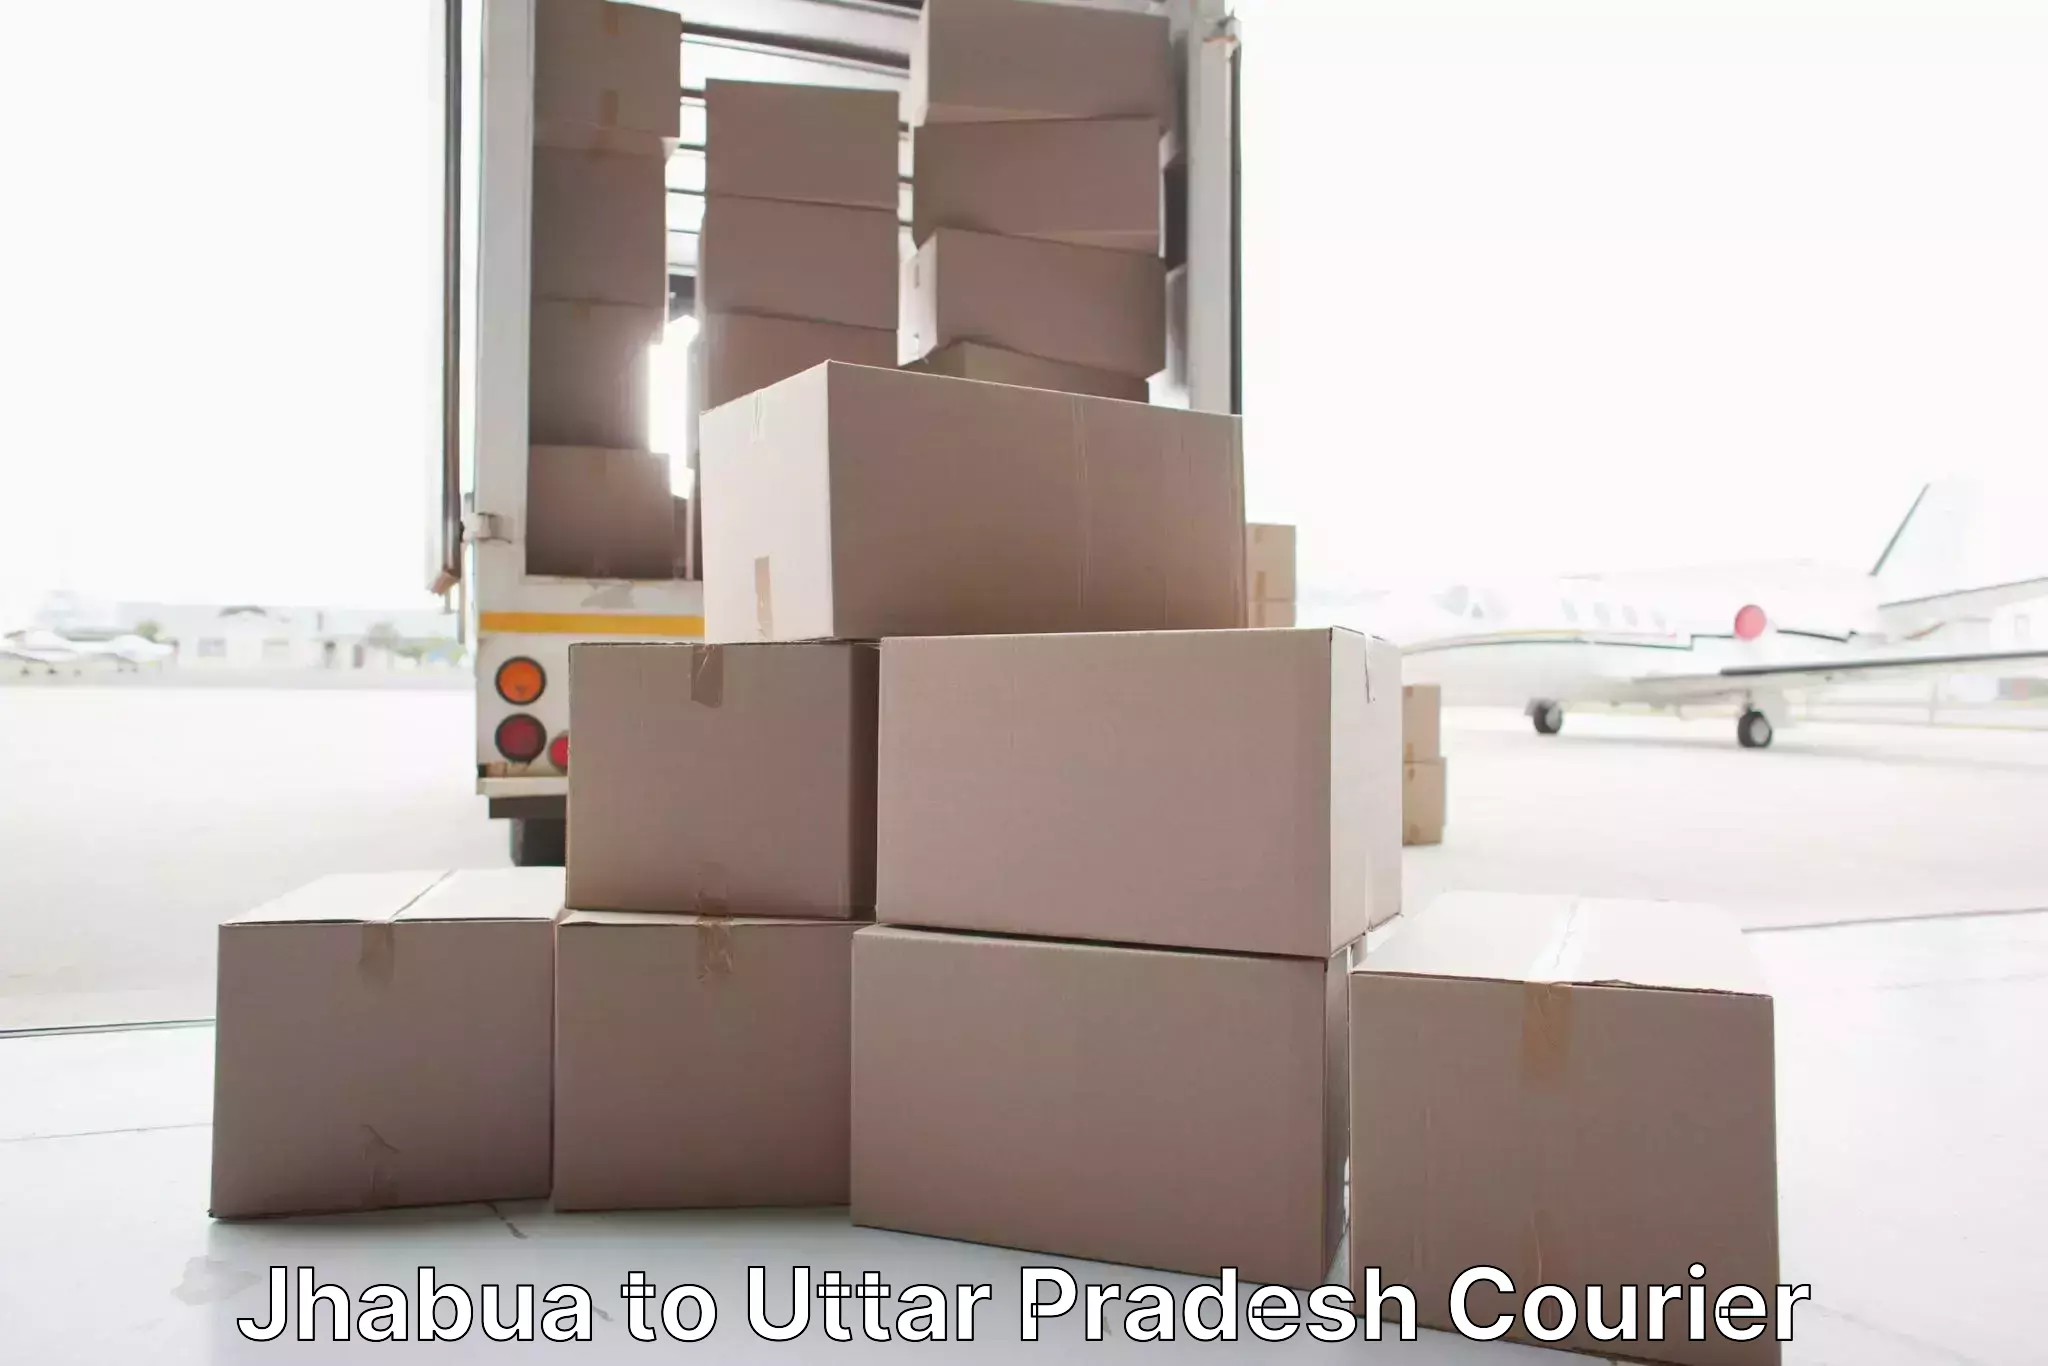 Affordable relocation services Jhabua to Chandwak